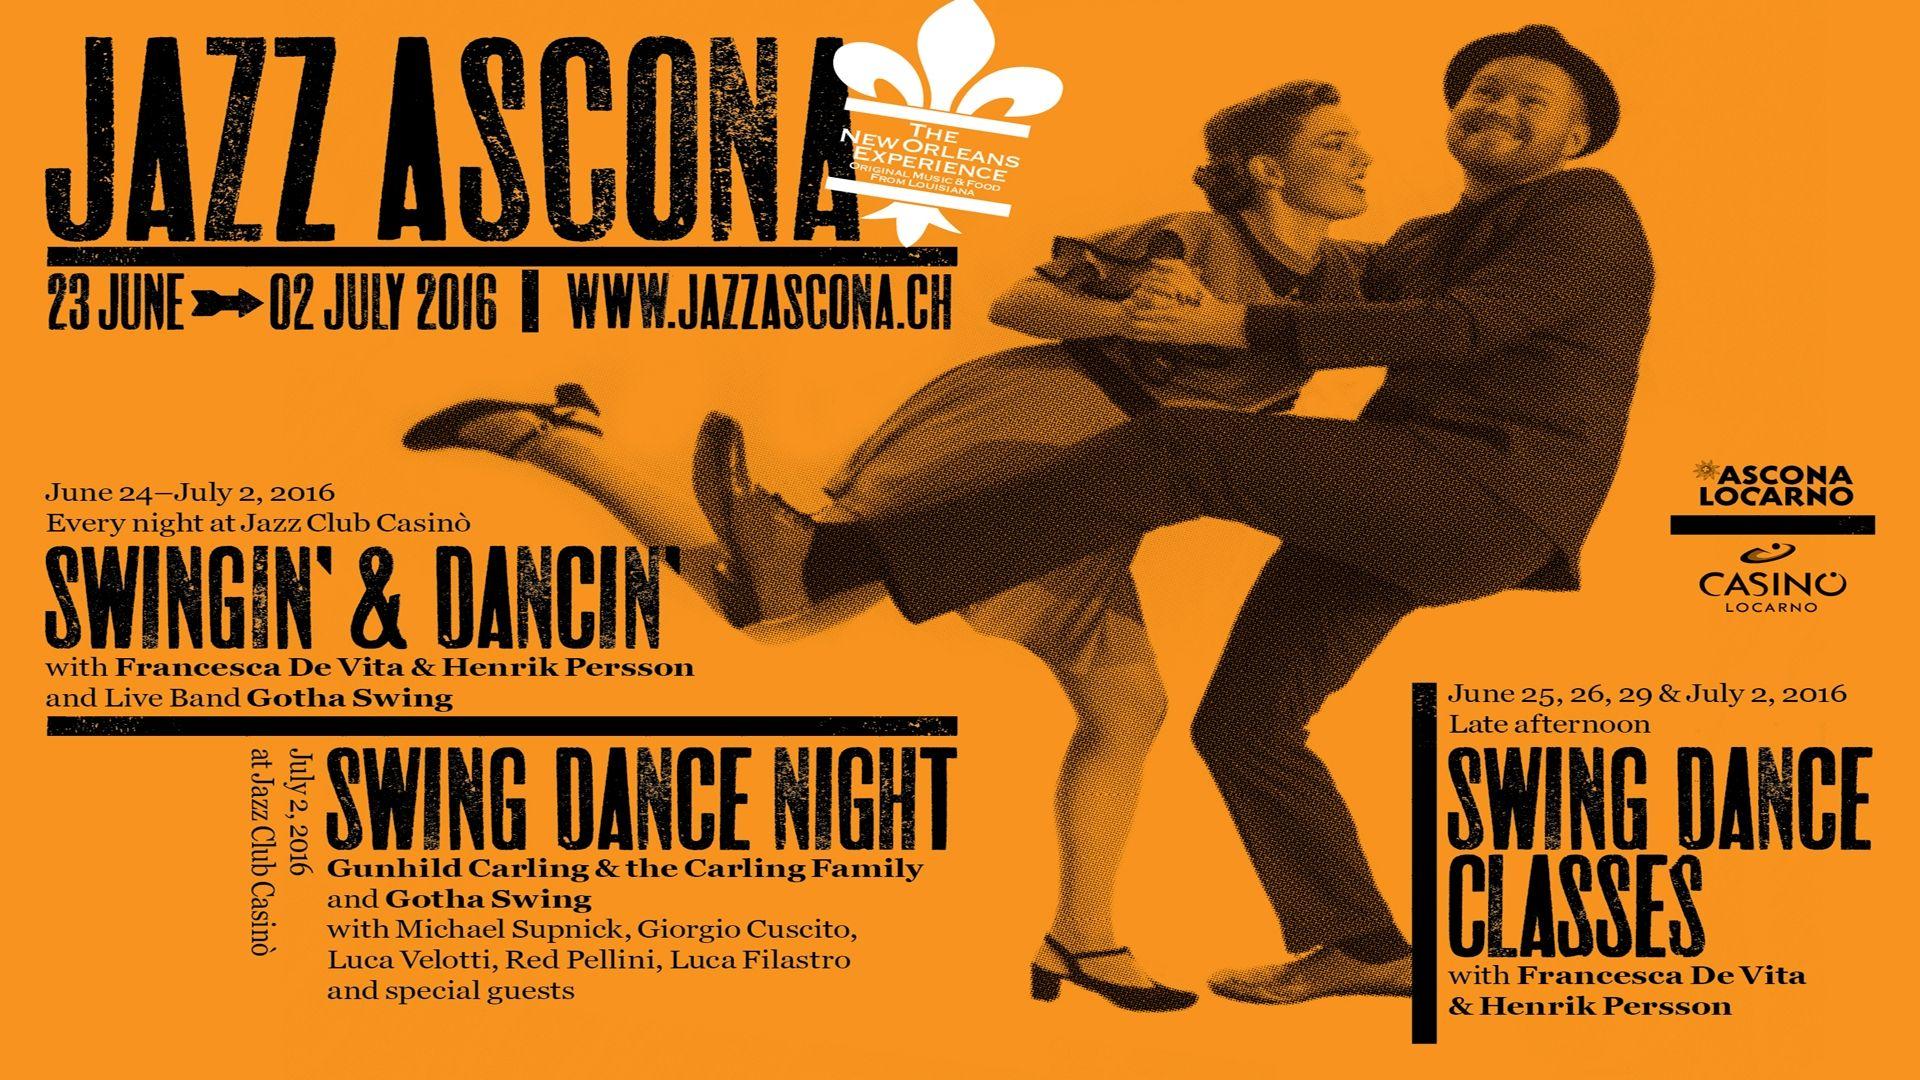 JazzAscona. The New Orleans Experience. Focus on swing dance